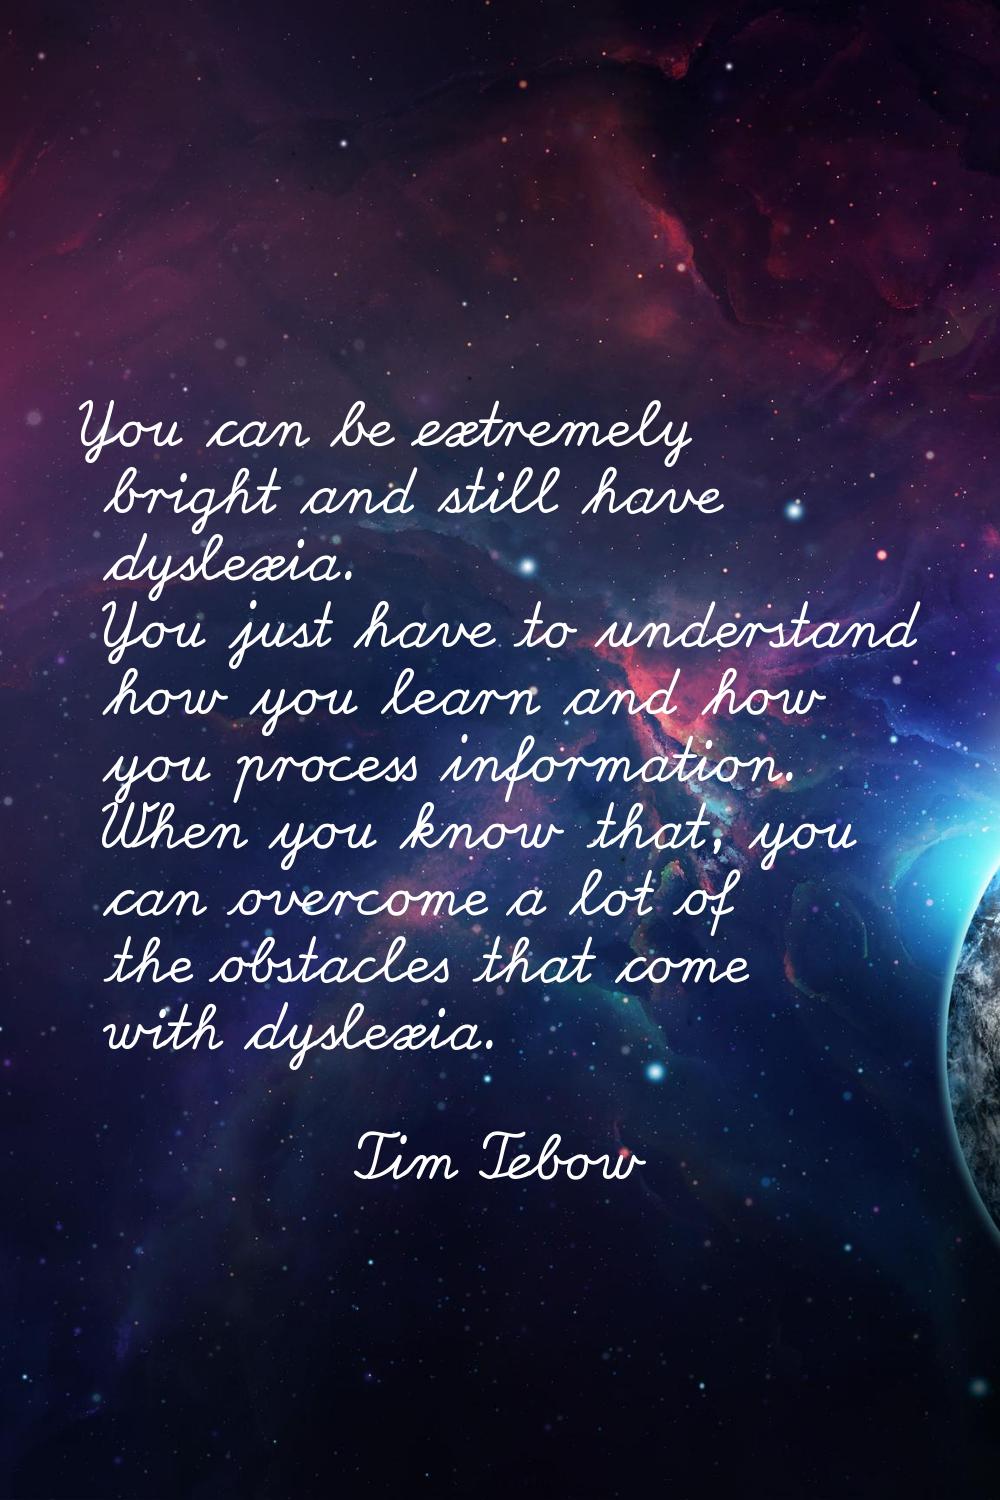 You can be extremely bright and still have dyslexia. You just have to understand how you learn and 